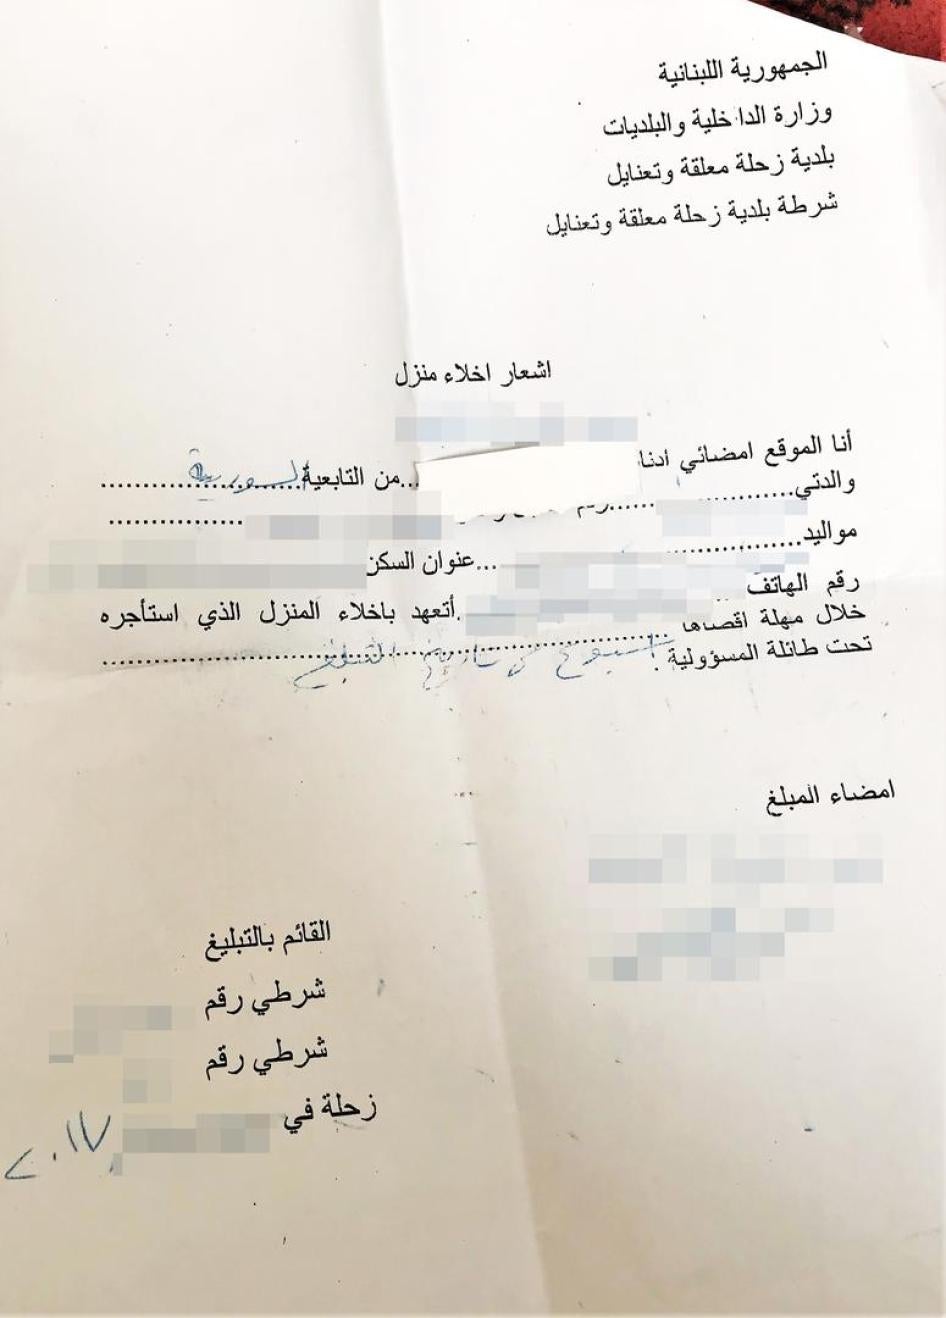 An eviction notice from the Zahle municipality which Syrian refugees were forced to sign promising they would leave their current residence within one week.